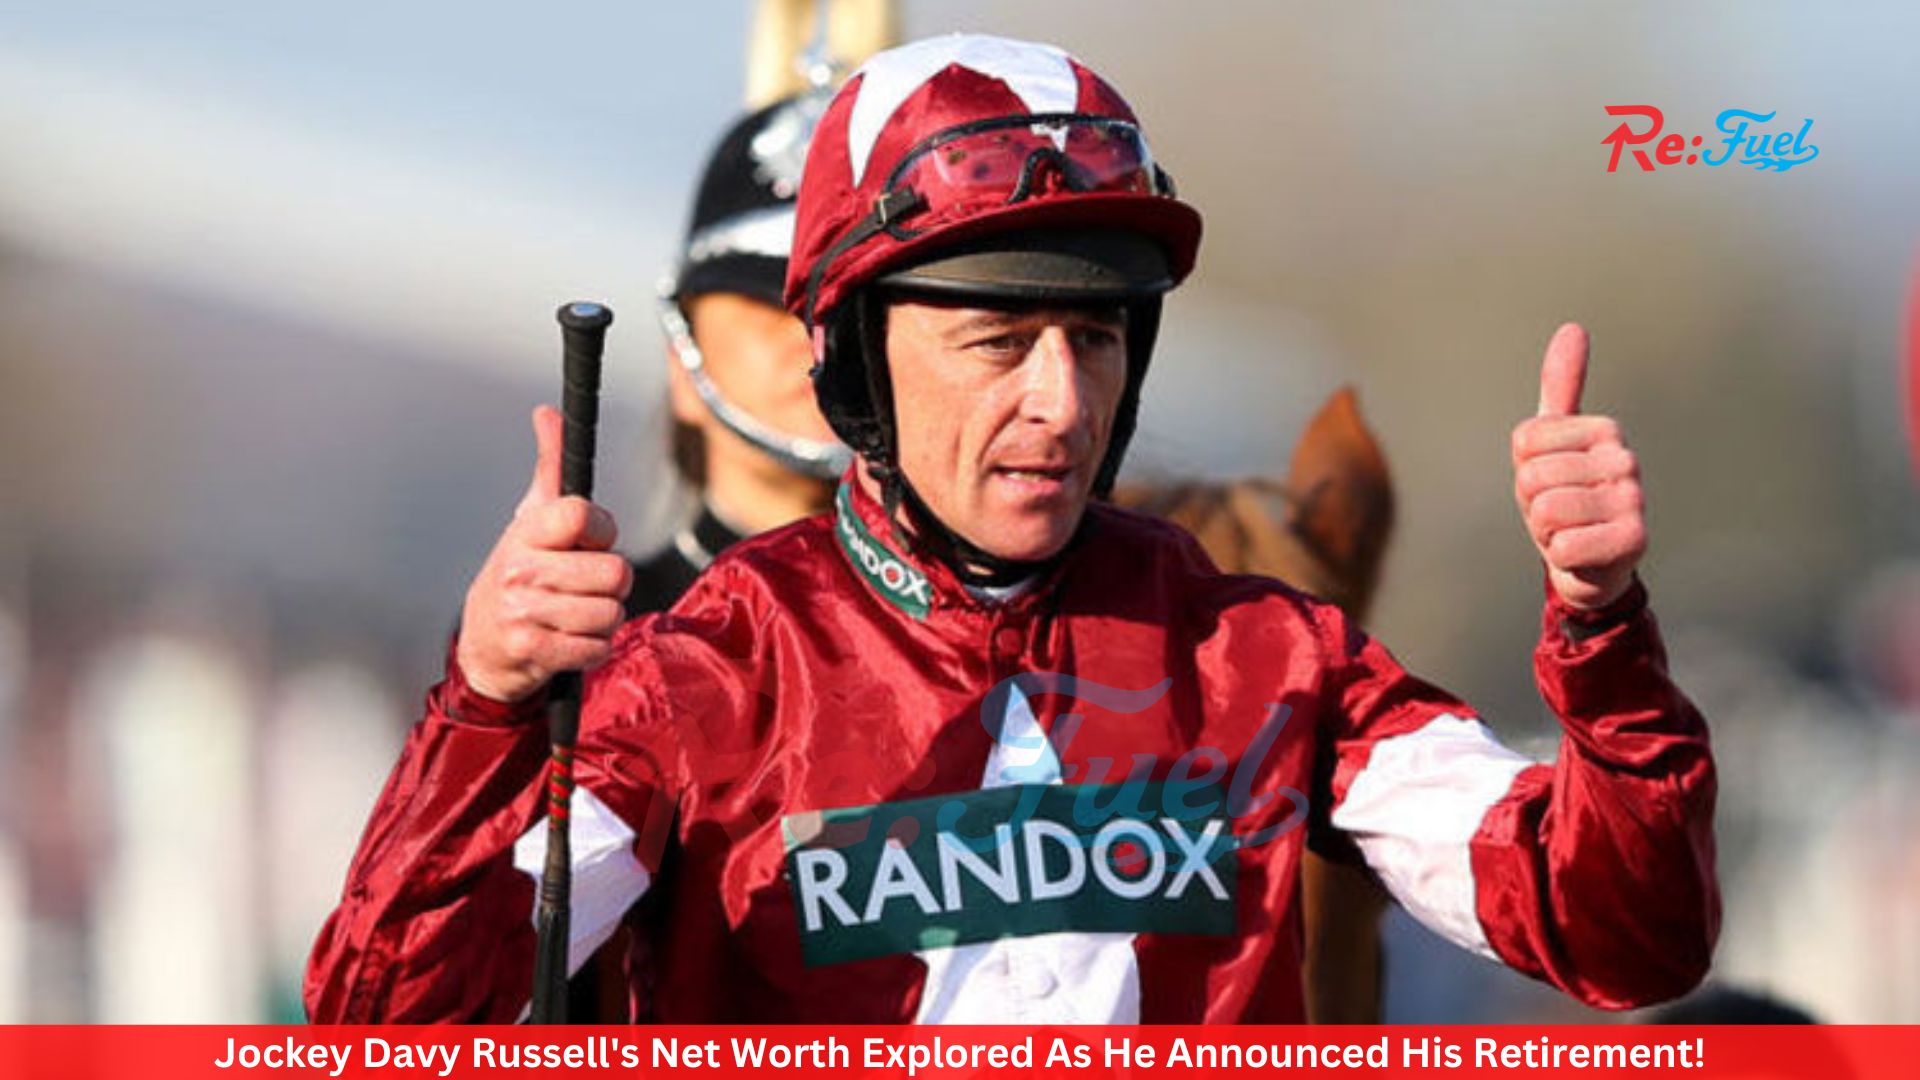 Jockey Davy Russell's Net Worth Explored As He Announced His Retirement!